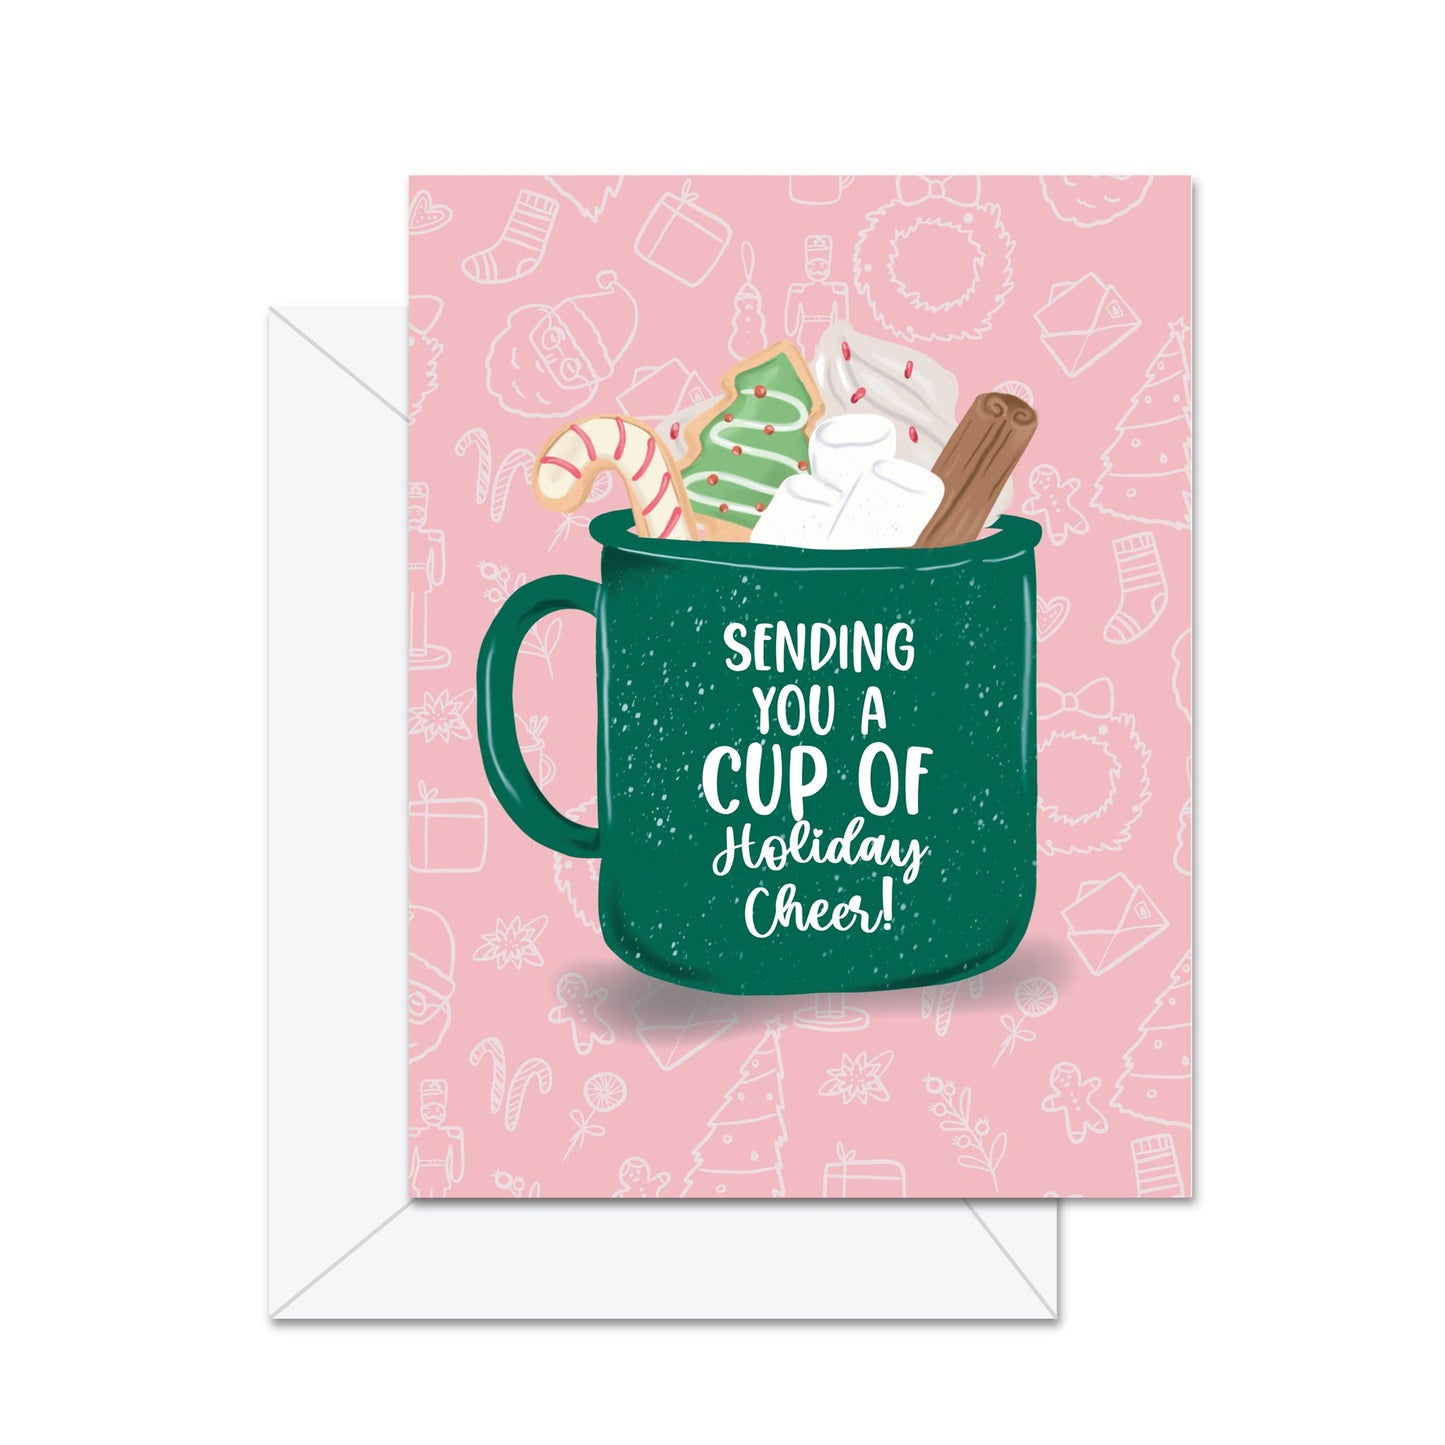 Sending You A Cup of Holiday Cheer! - Greeting Card